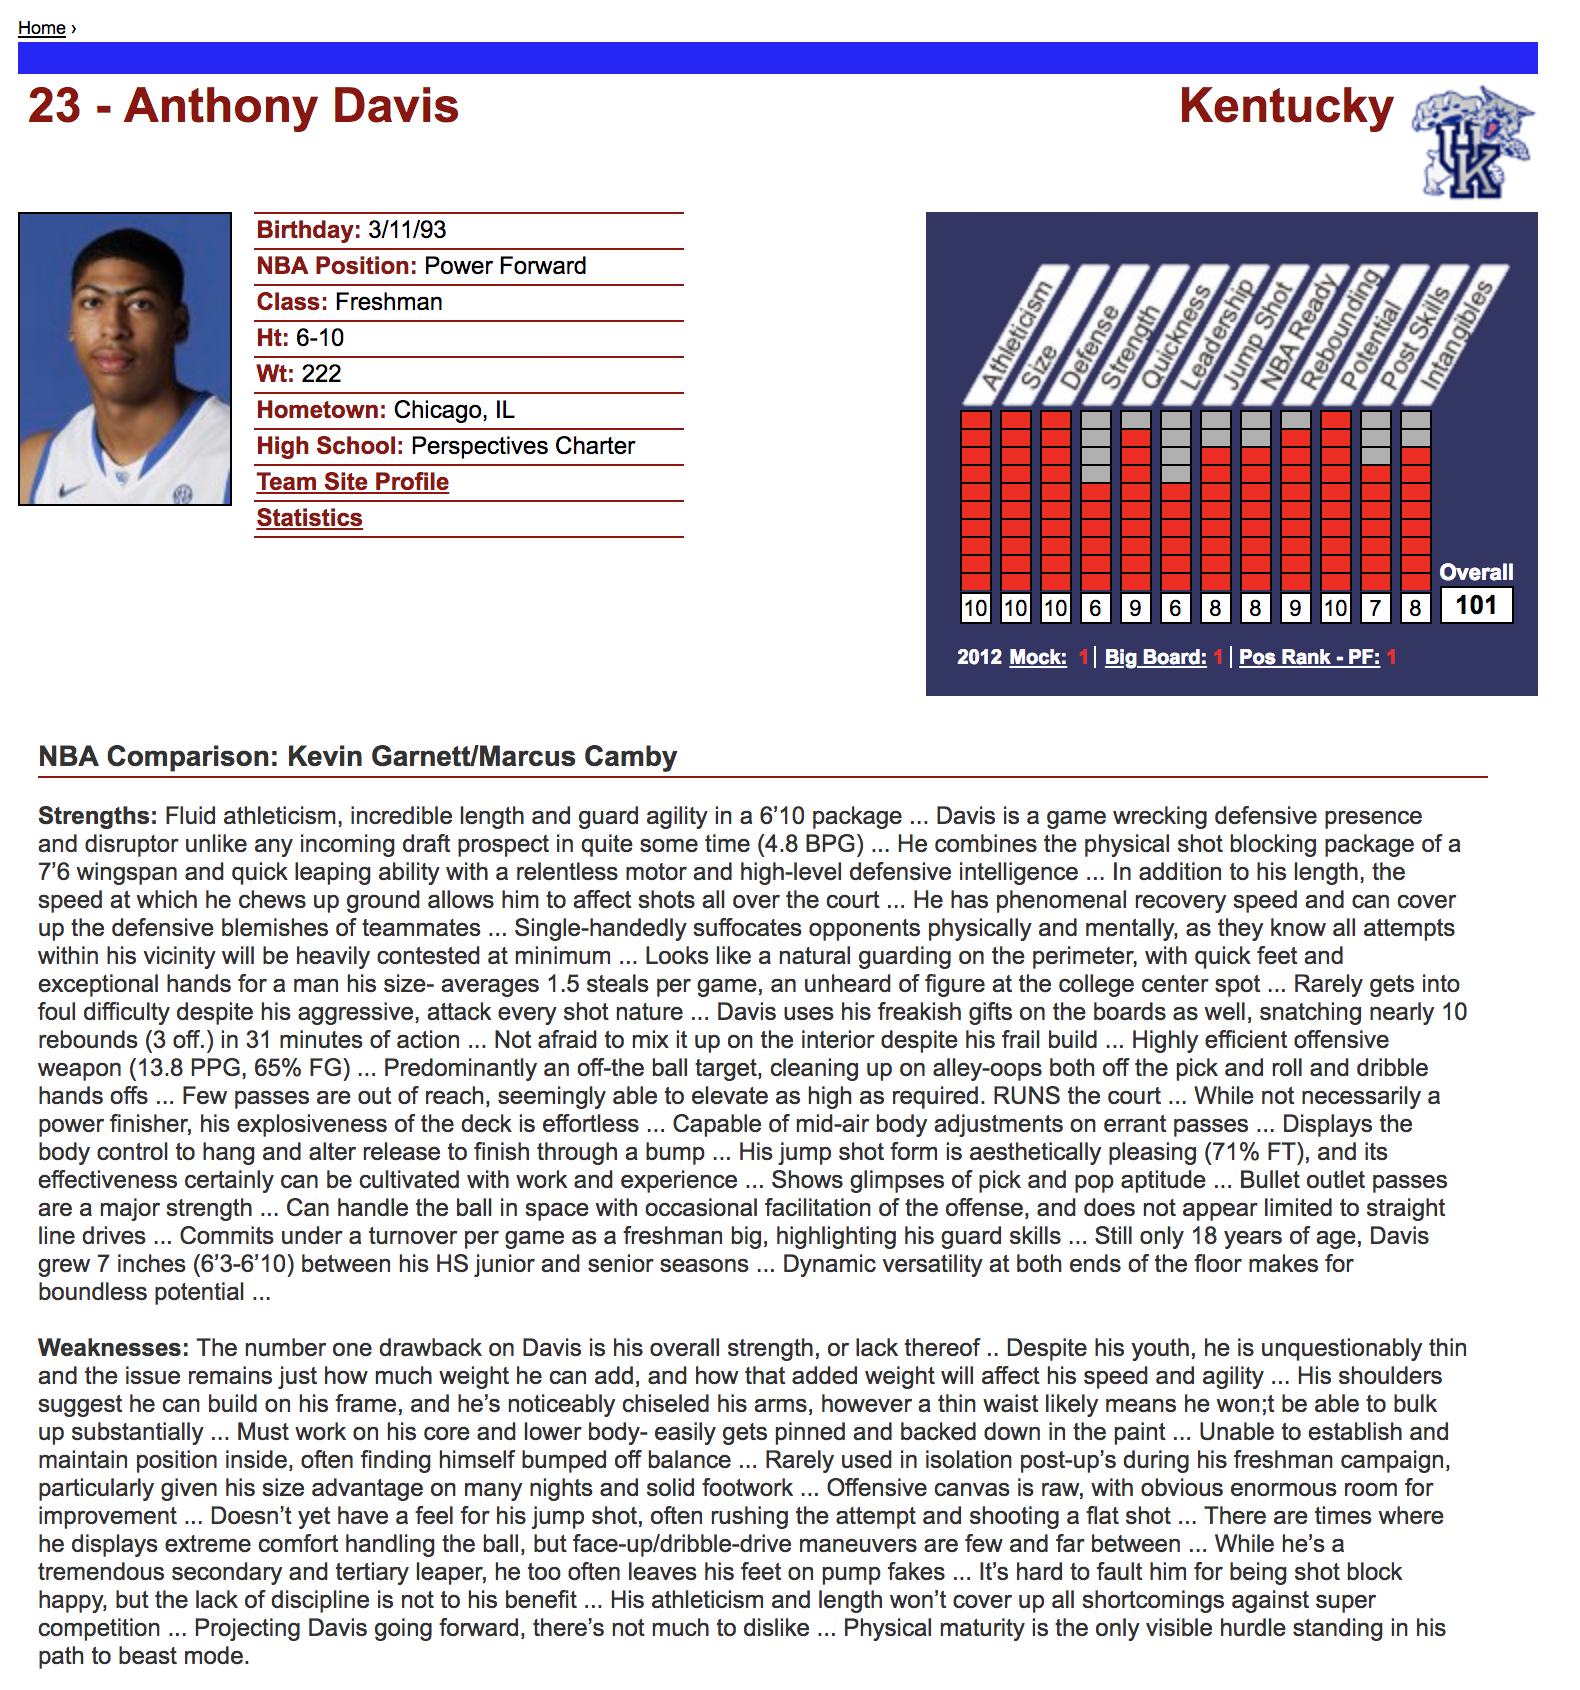 My Model Monday: Nba Draft Scouting Text Analysis | Model 284 Intended For Basketball Player Scouting Report Template